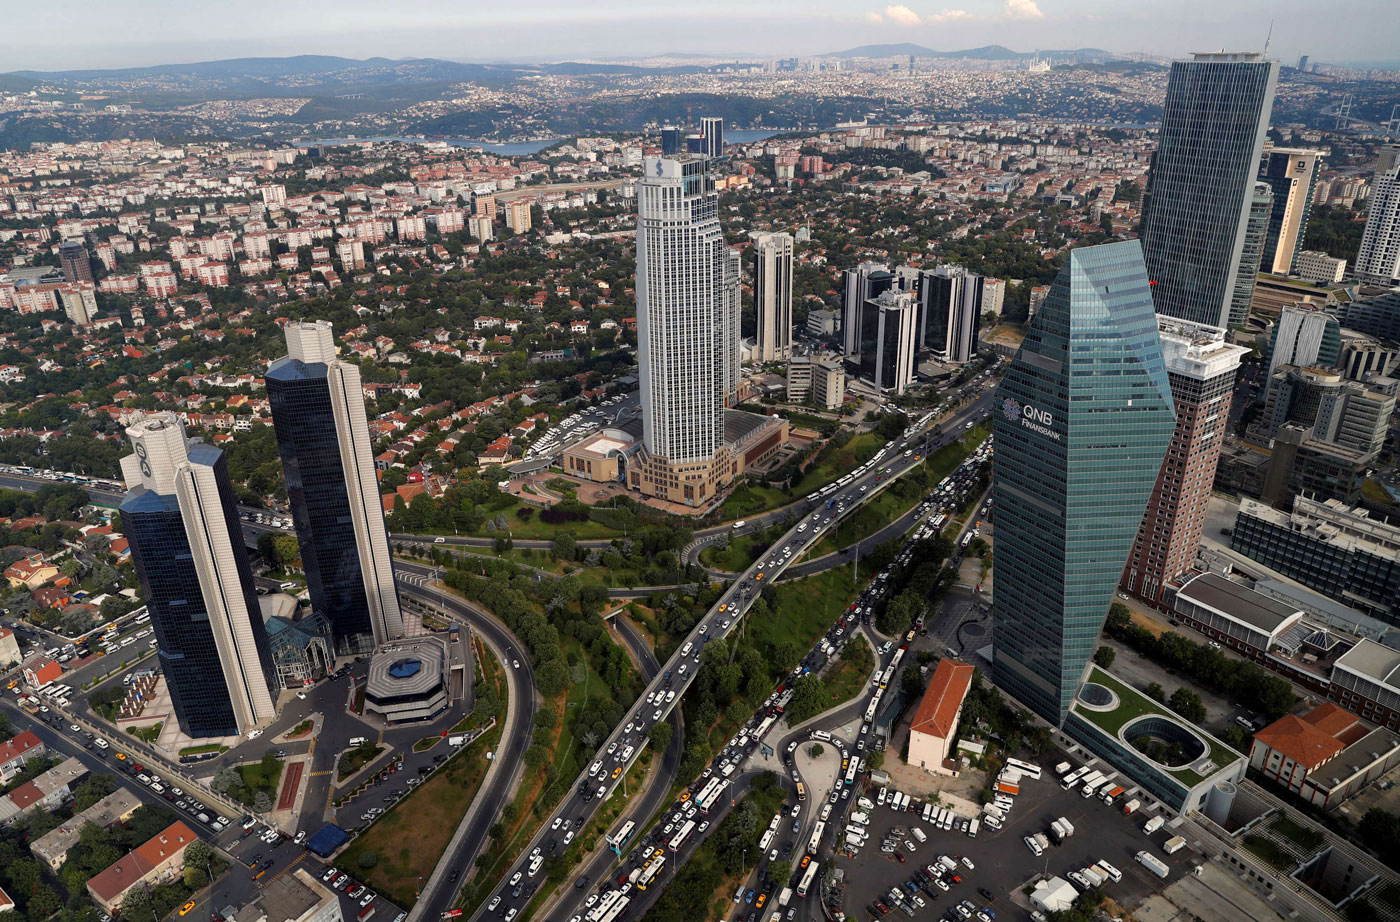 Business and financial district of Levent is pictured in Istanbul